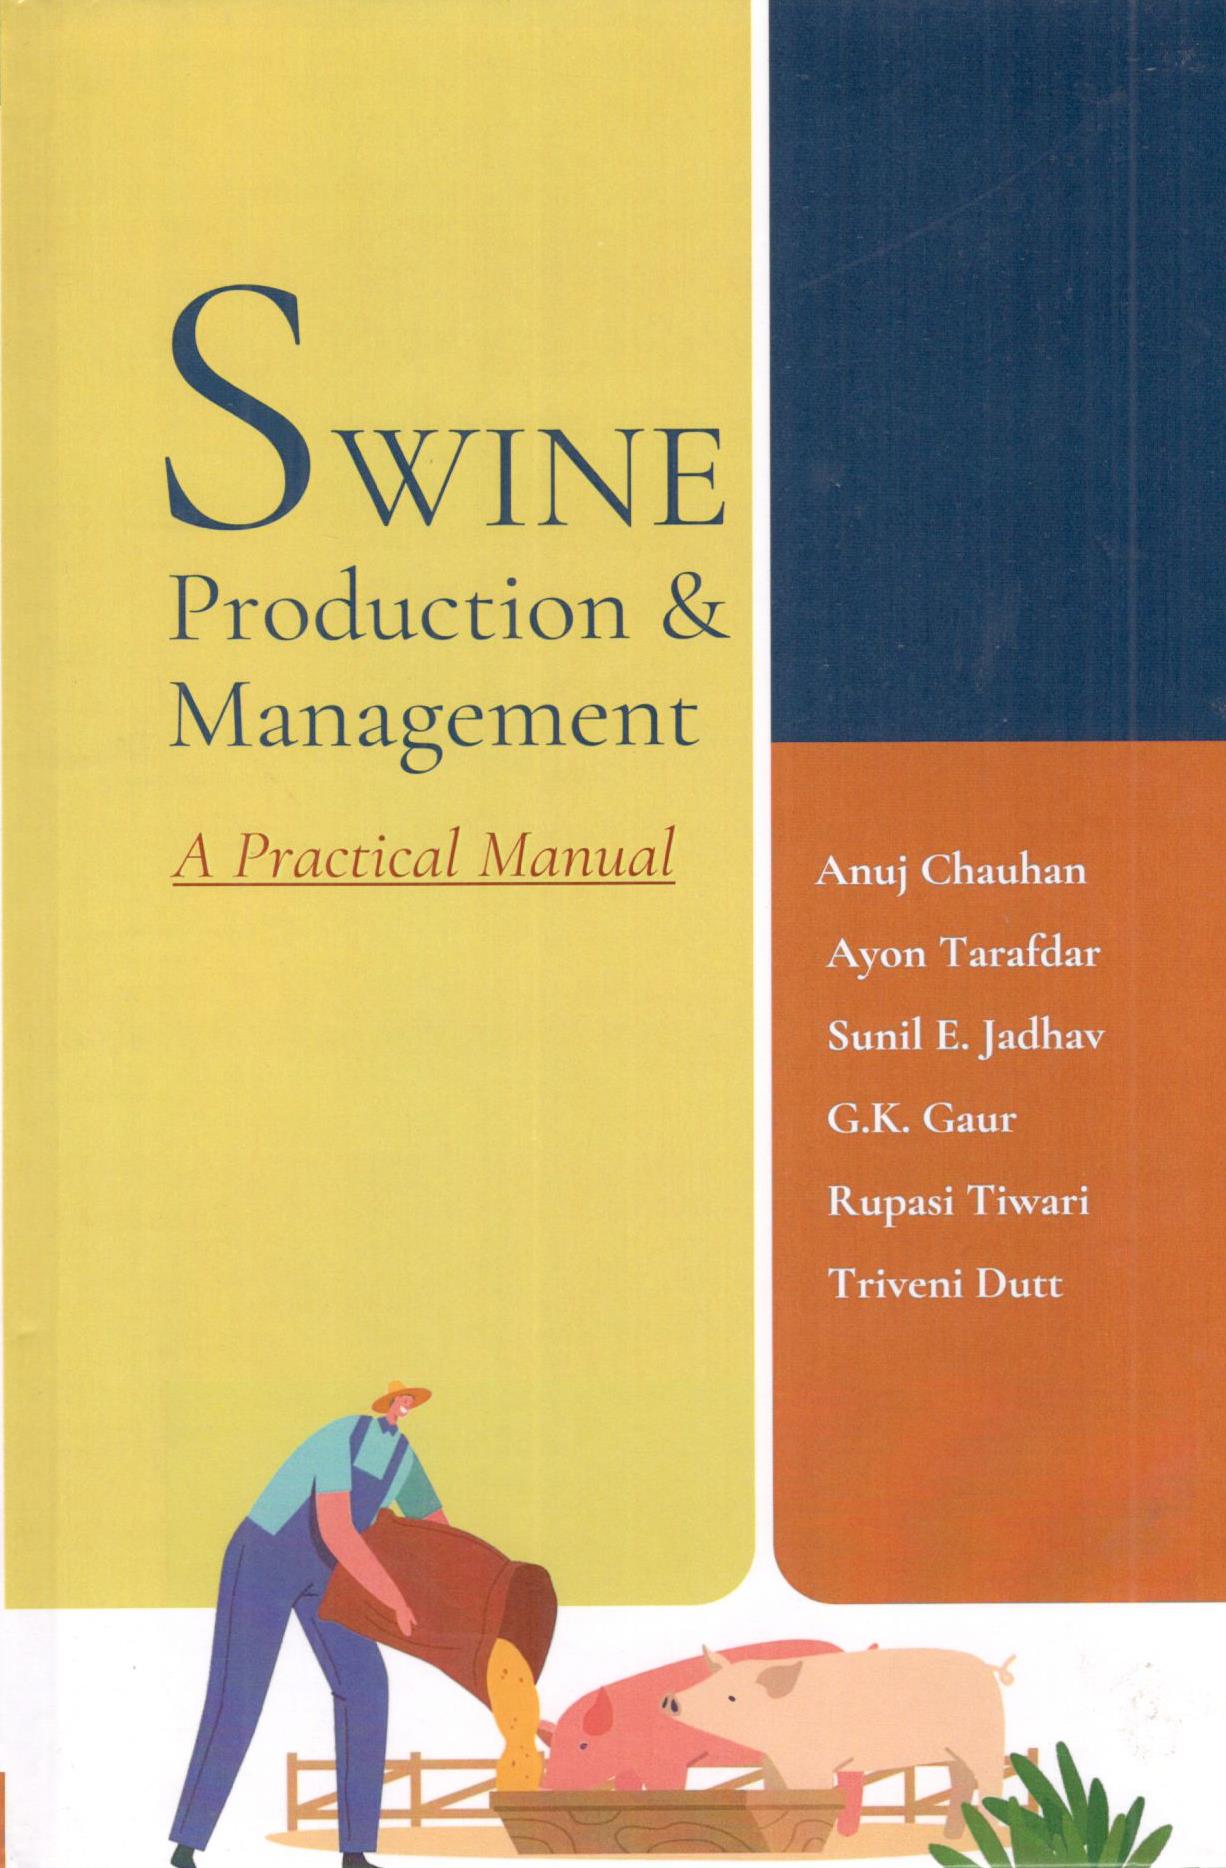 Swine Production and Management: A Practical Manual